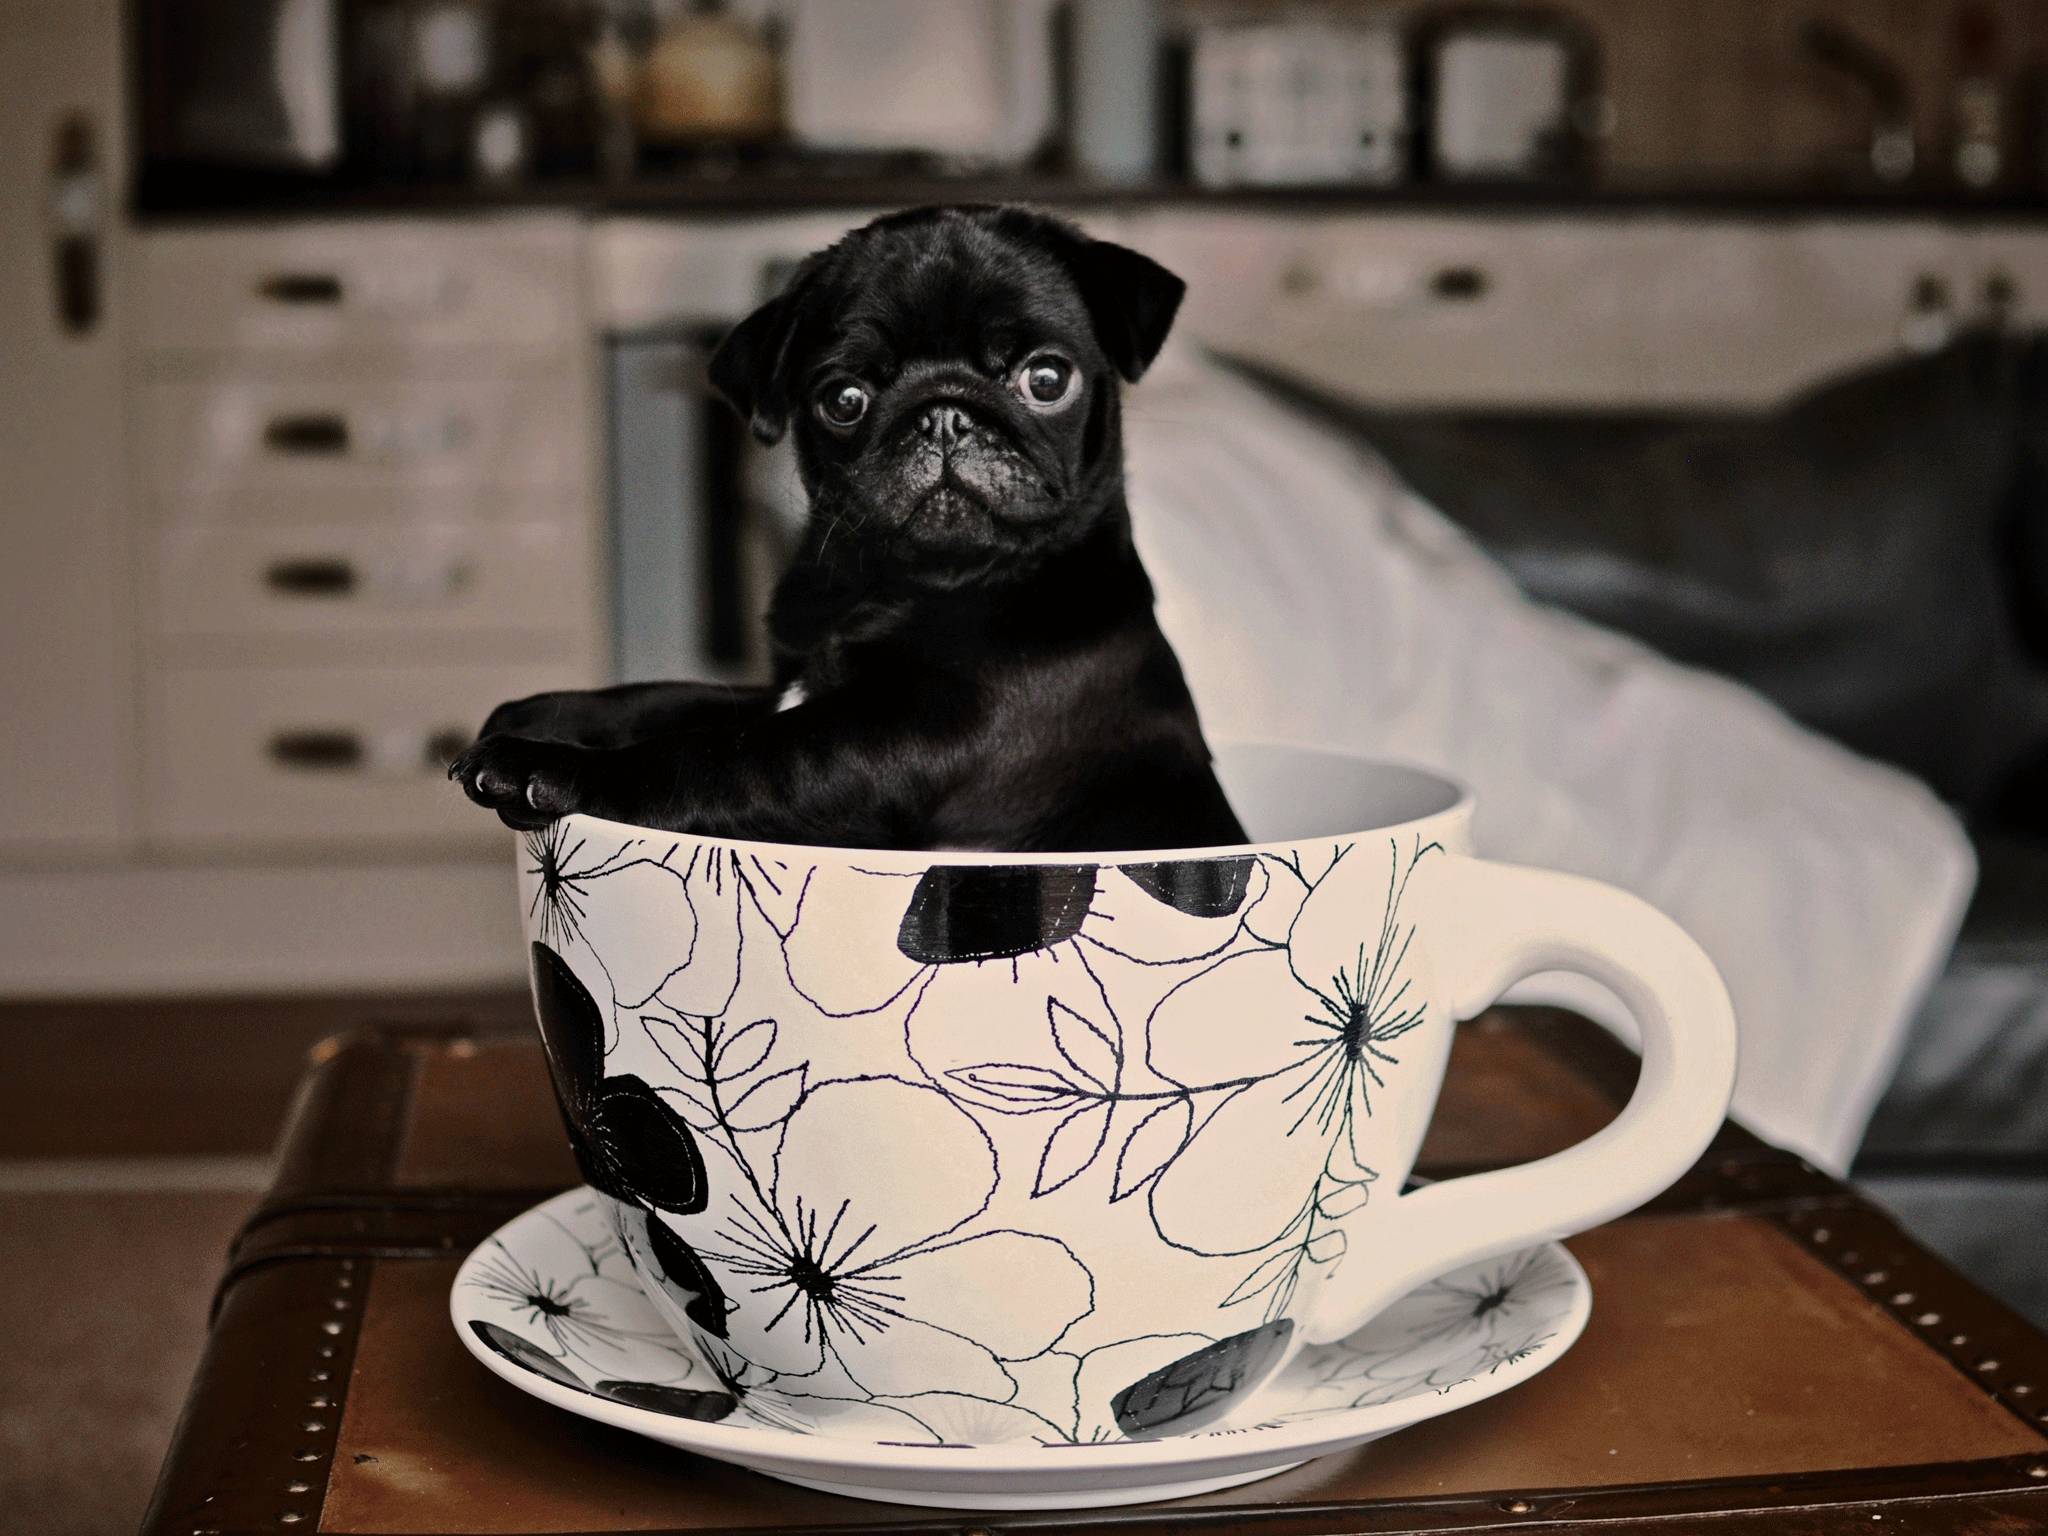 Dog cafe is a good excuse to use this picture of a pug puppy in a teacup